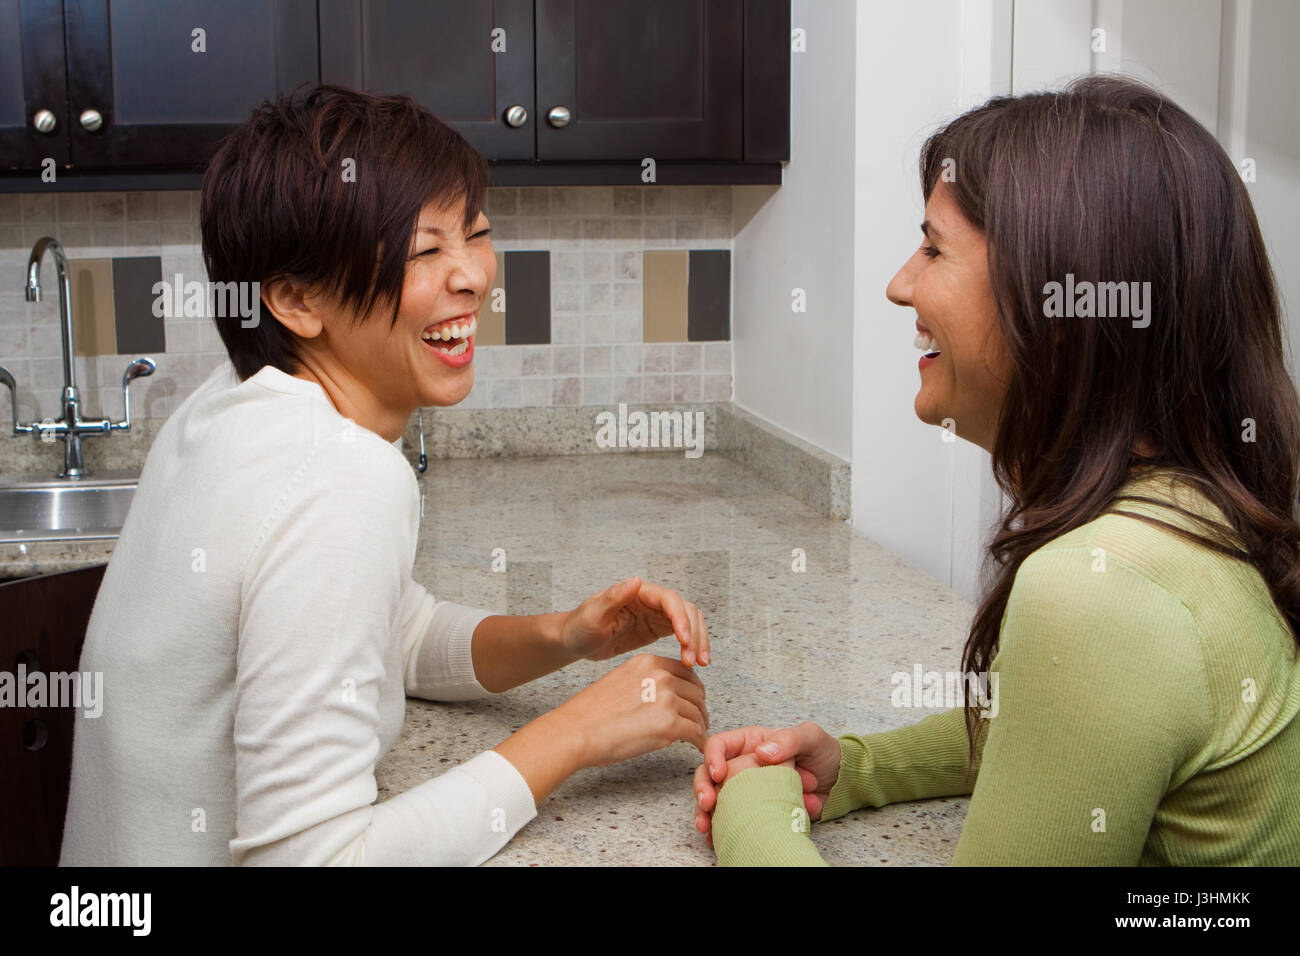 Diverse group of women talking and laughing. Stock Photo